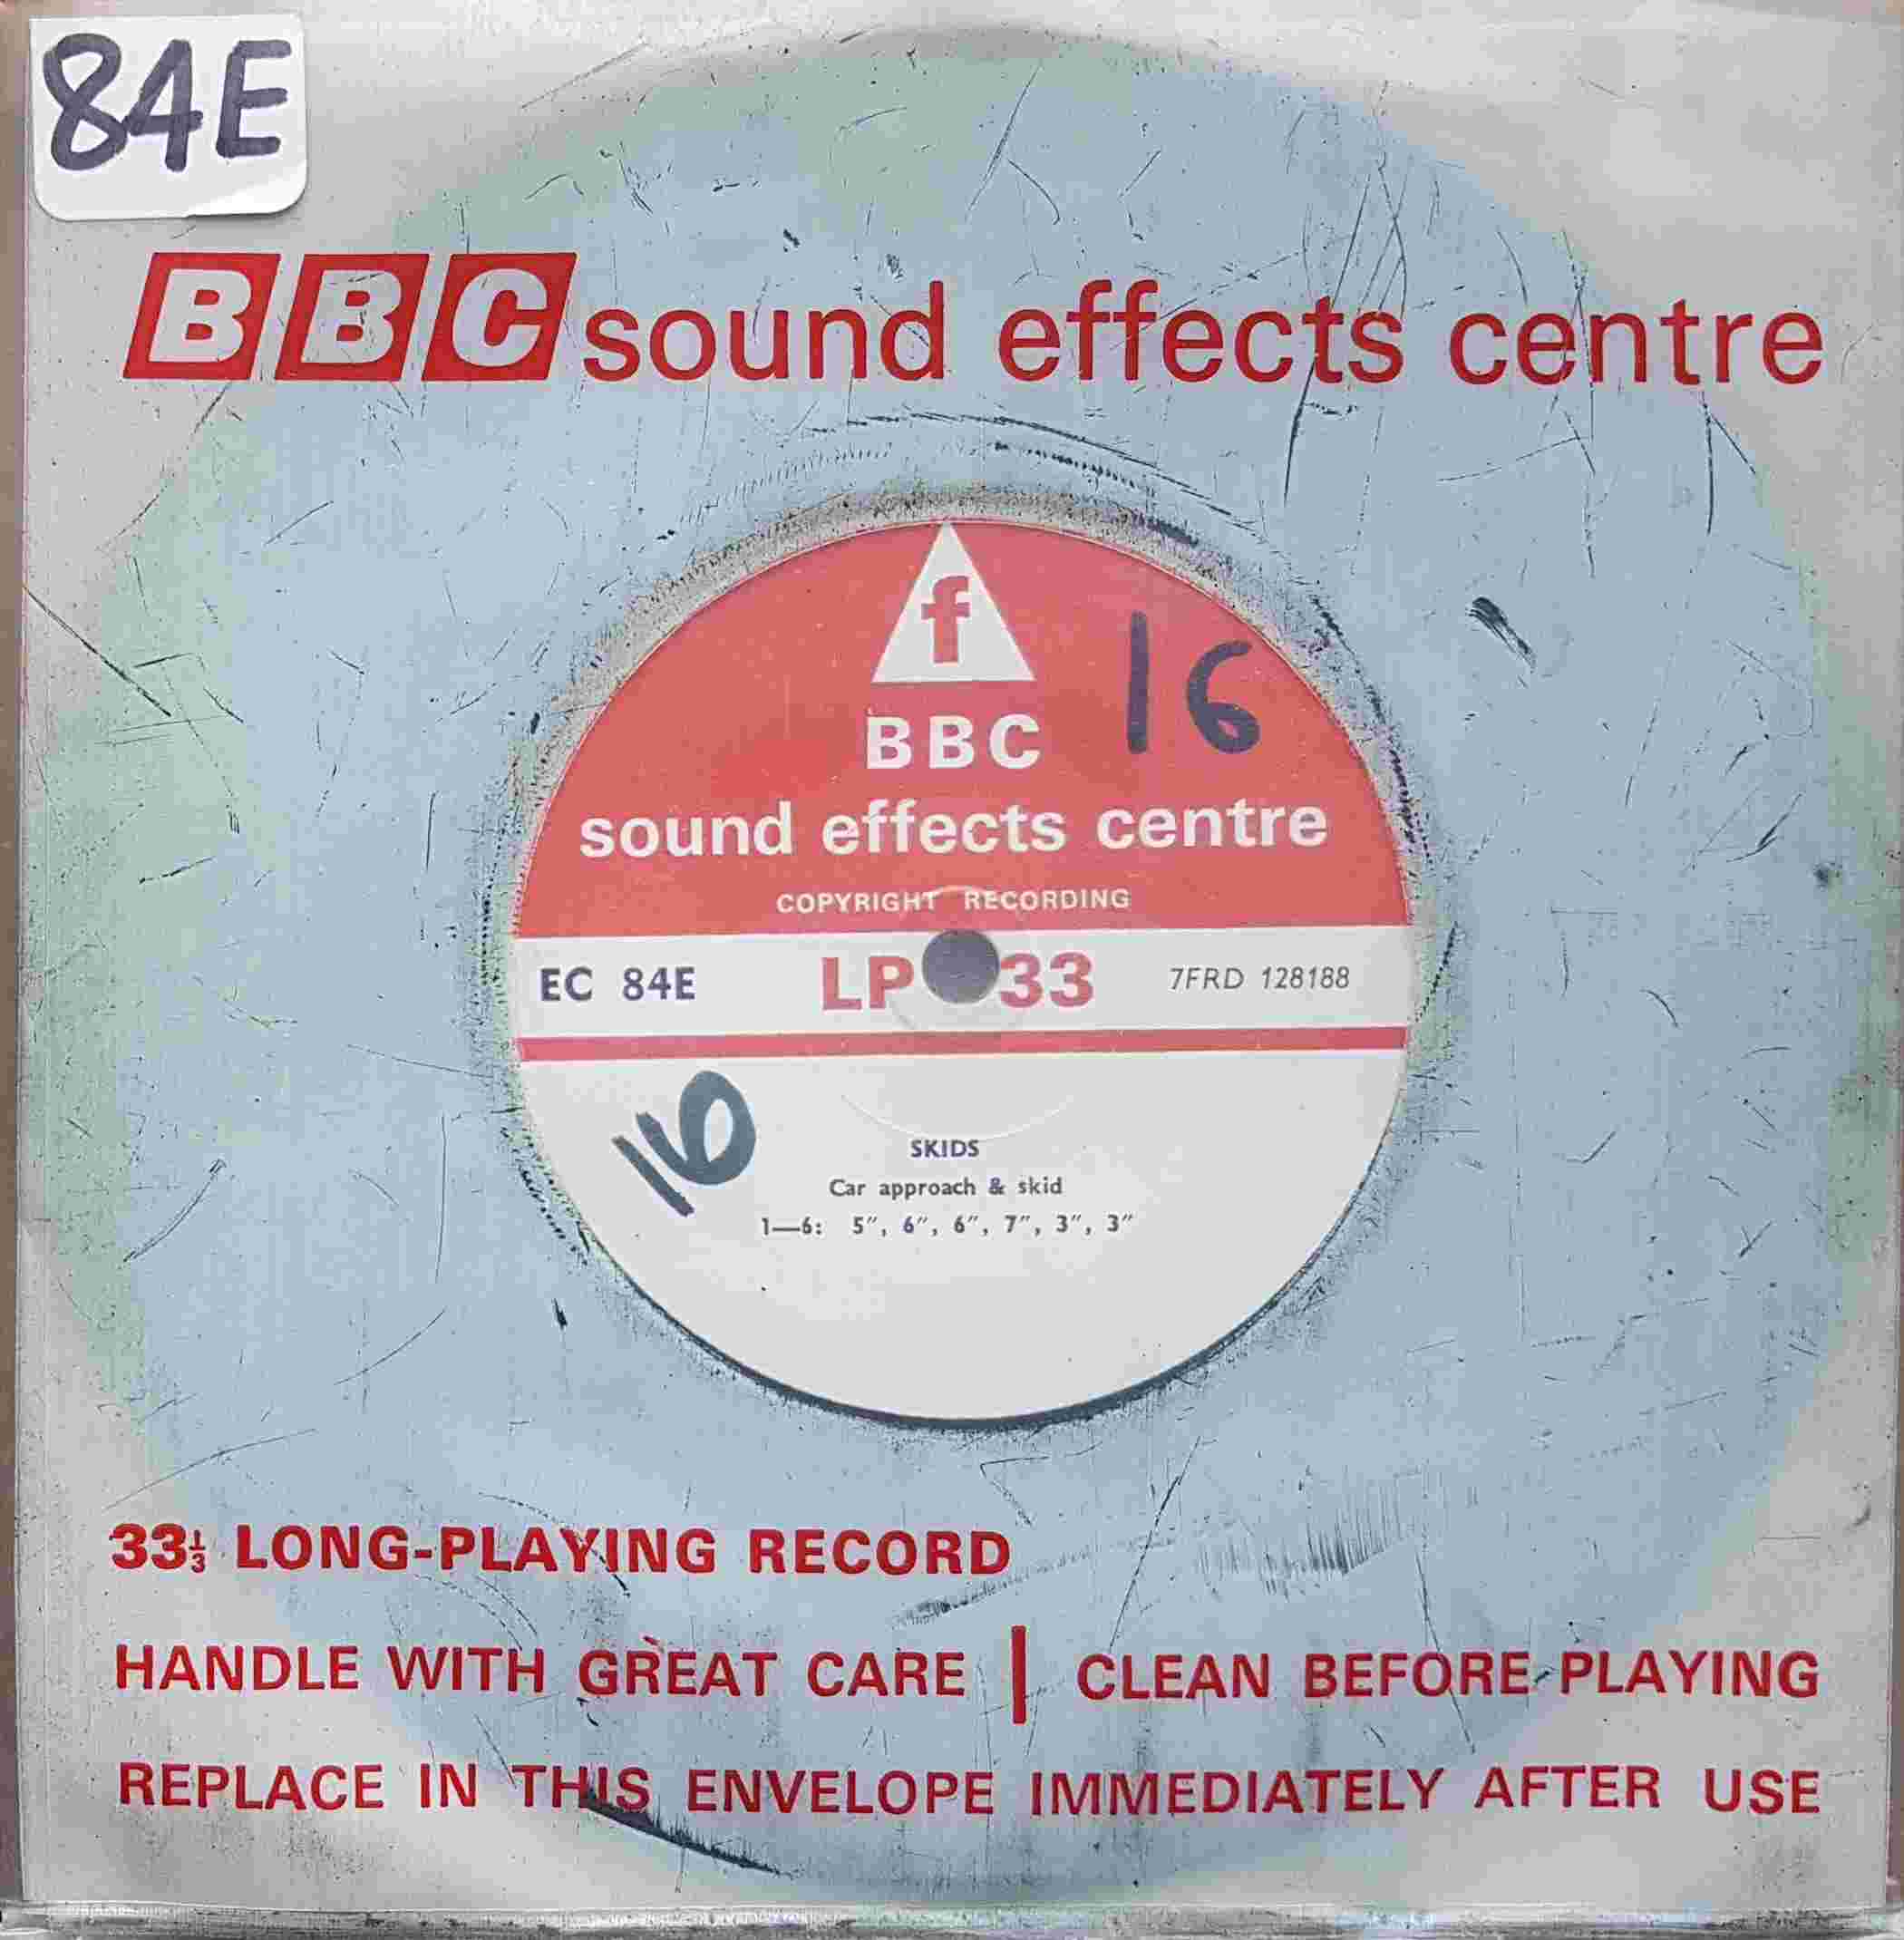 Picture of EC 84E Skids by artist Not registered from the BBC singles - Records and Tapes library